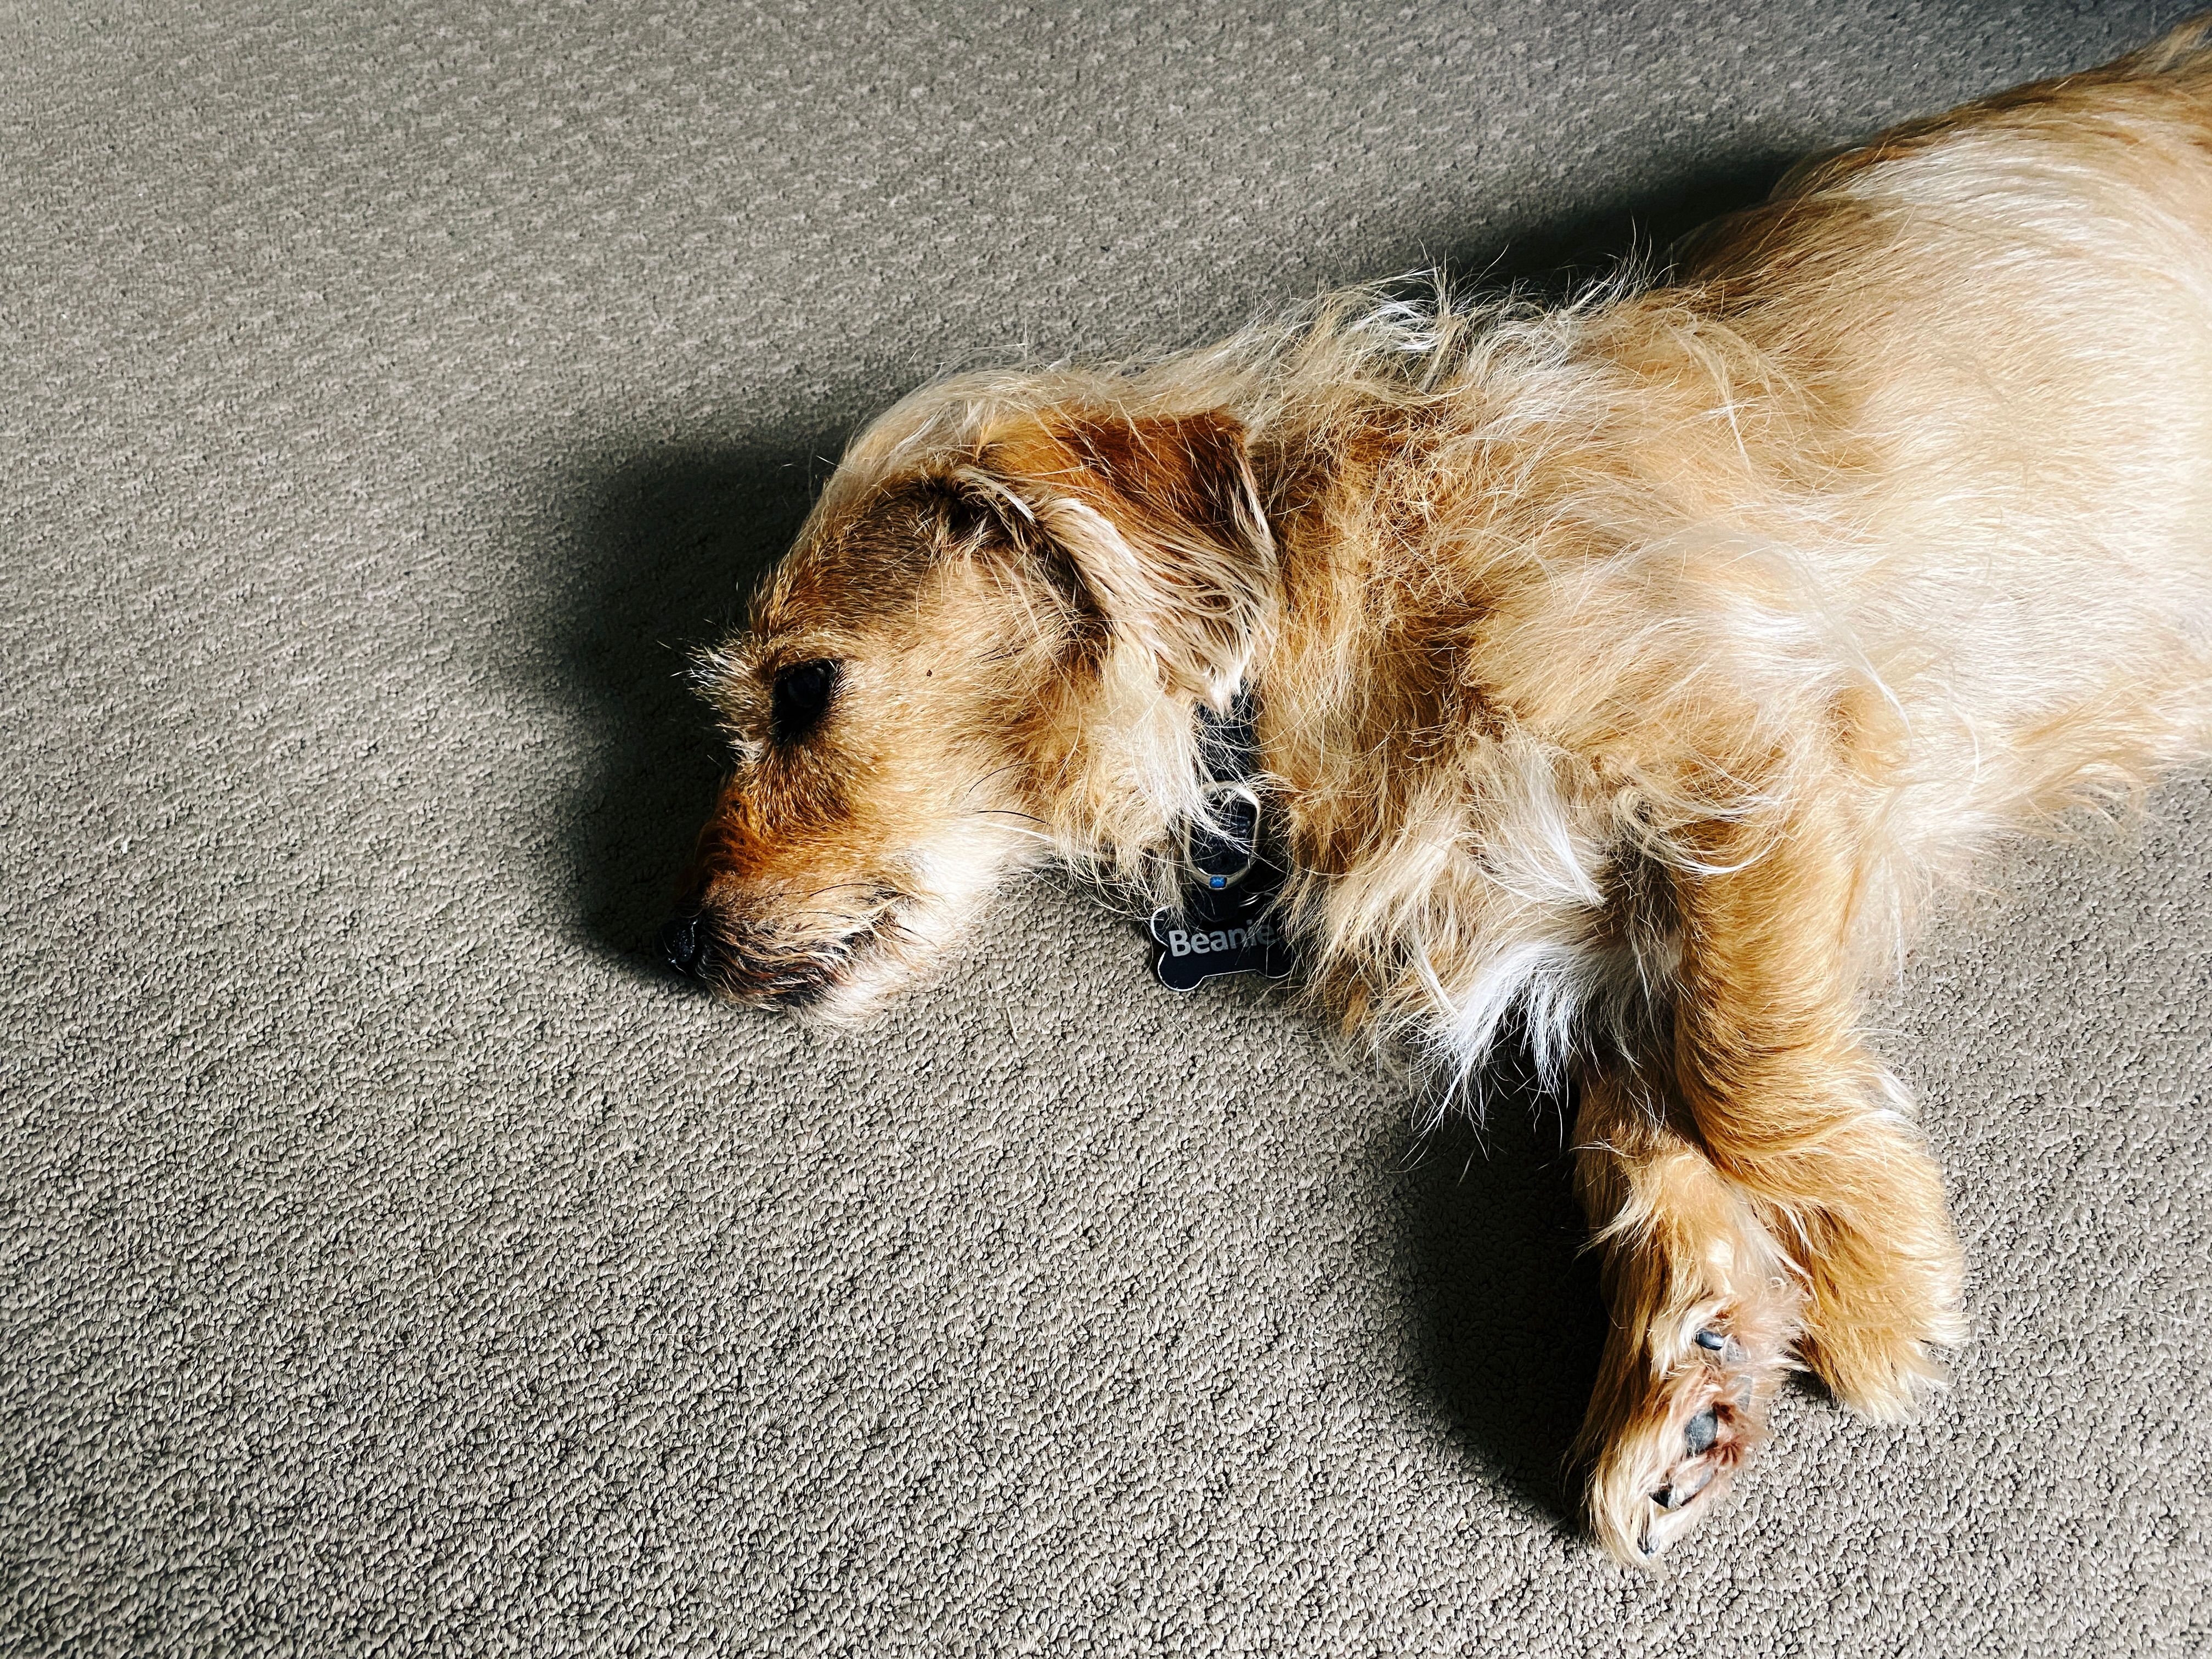 A photo of a small scruffy blonde dog lying on his side on the floor, half-asleep.